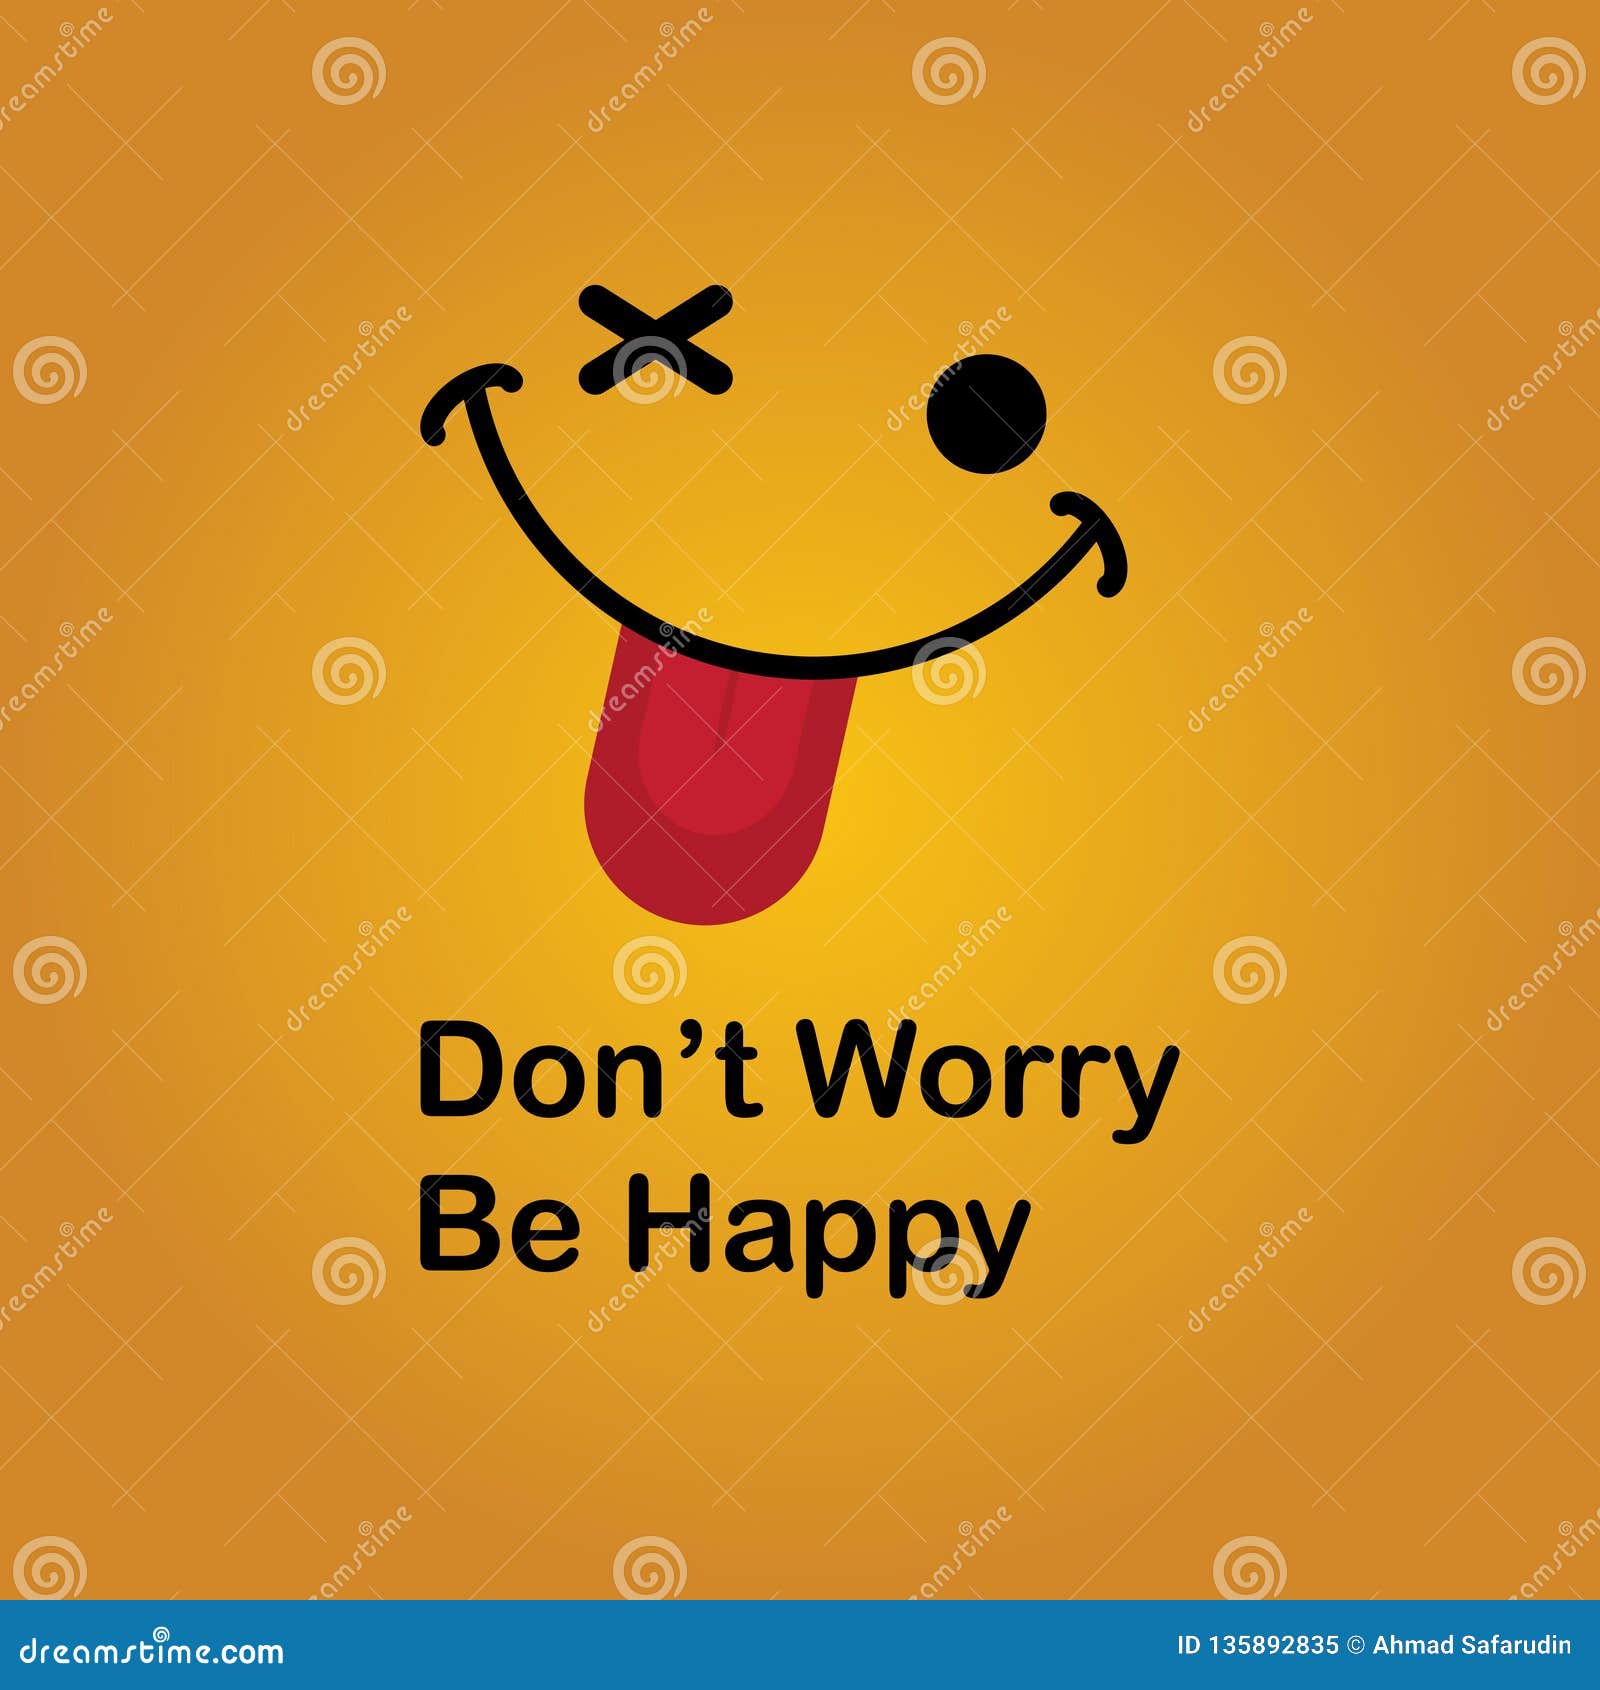 Motivational Quotes Poster Banner Design with Funny Happy and Smile Vector  Illustration Stock Vector - Illustration of expression, green: 135892835